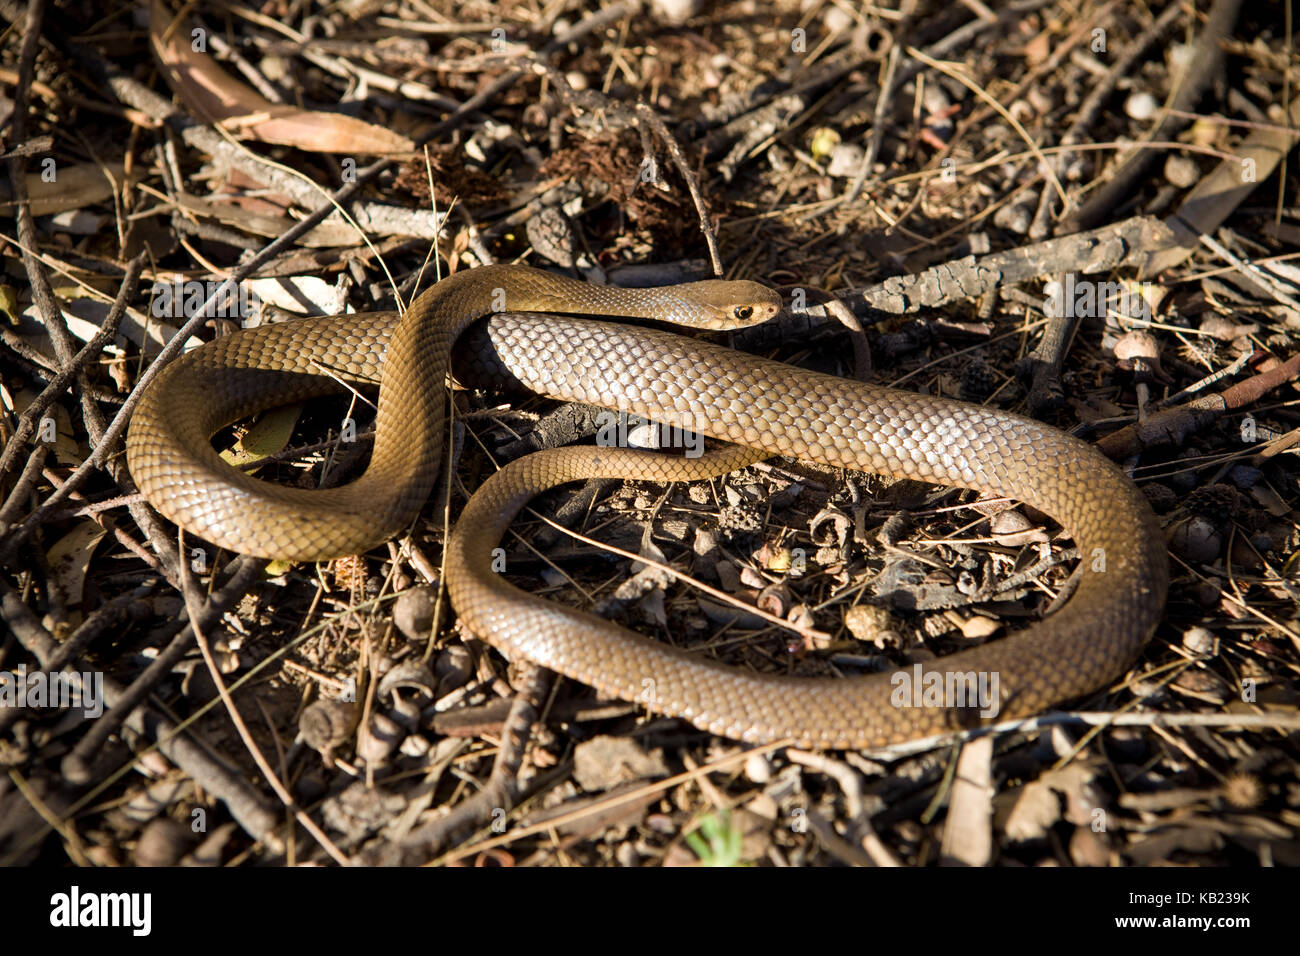 Inhabiting a wide portion of Australia from deserts to coastal regions, the Eastern Brown is one of the most deadly snakes in the world. Although note Stock Photo